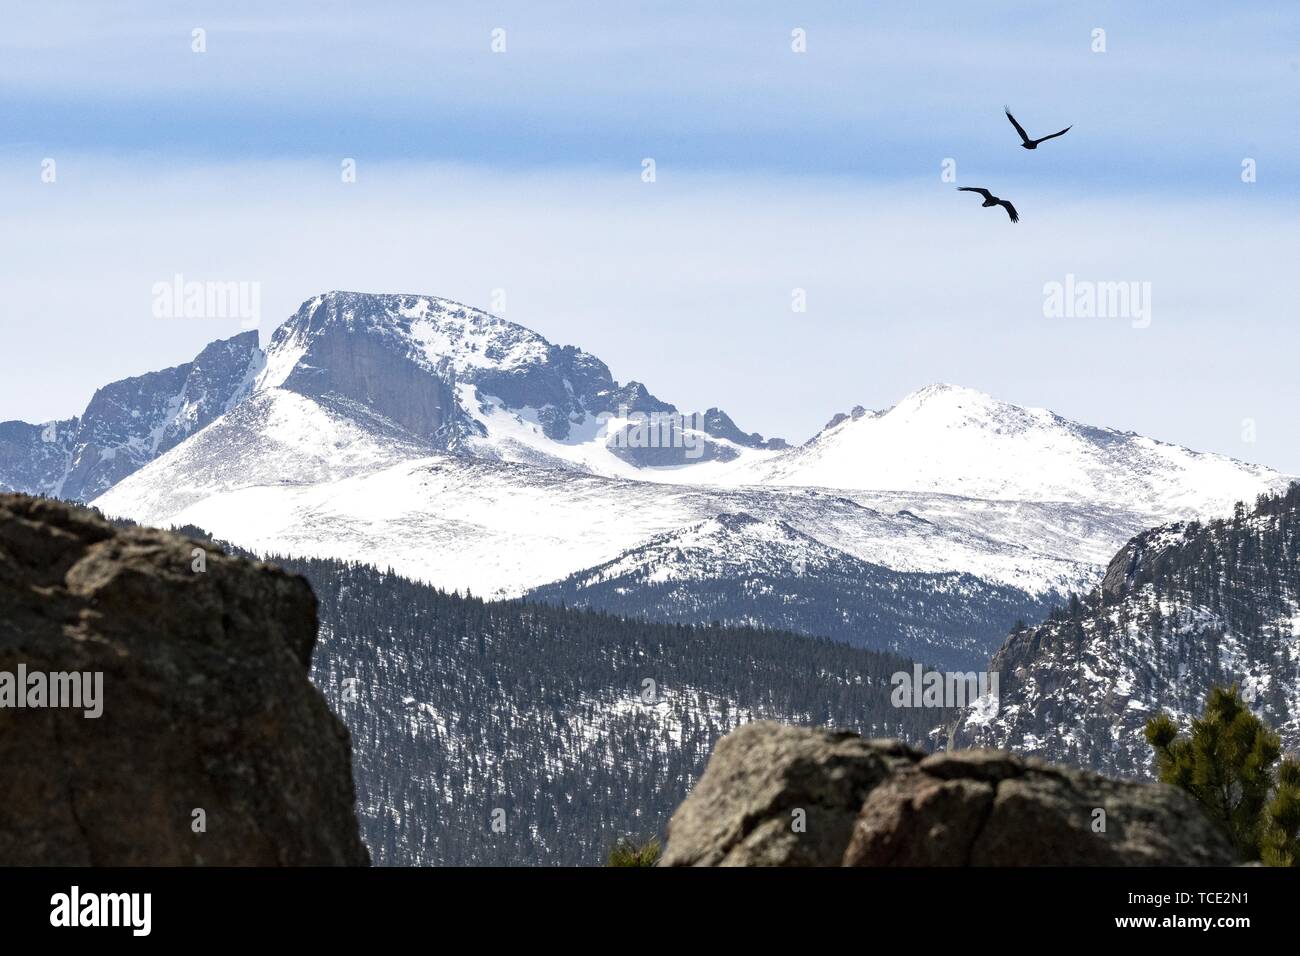 Two ravens flying over Longs Peak, Rocky mountains, Colorado, United States Stock Photo